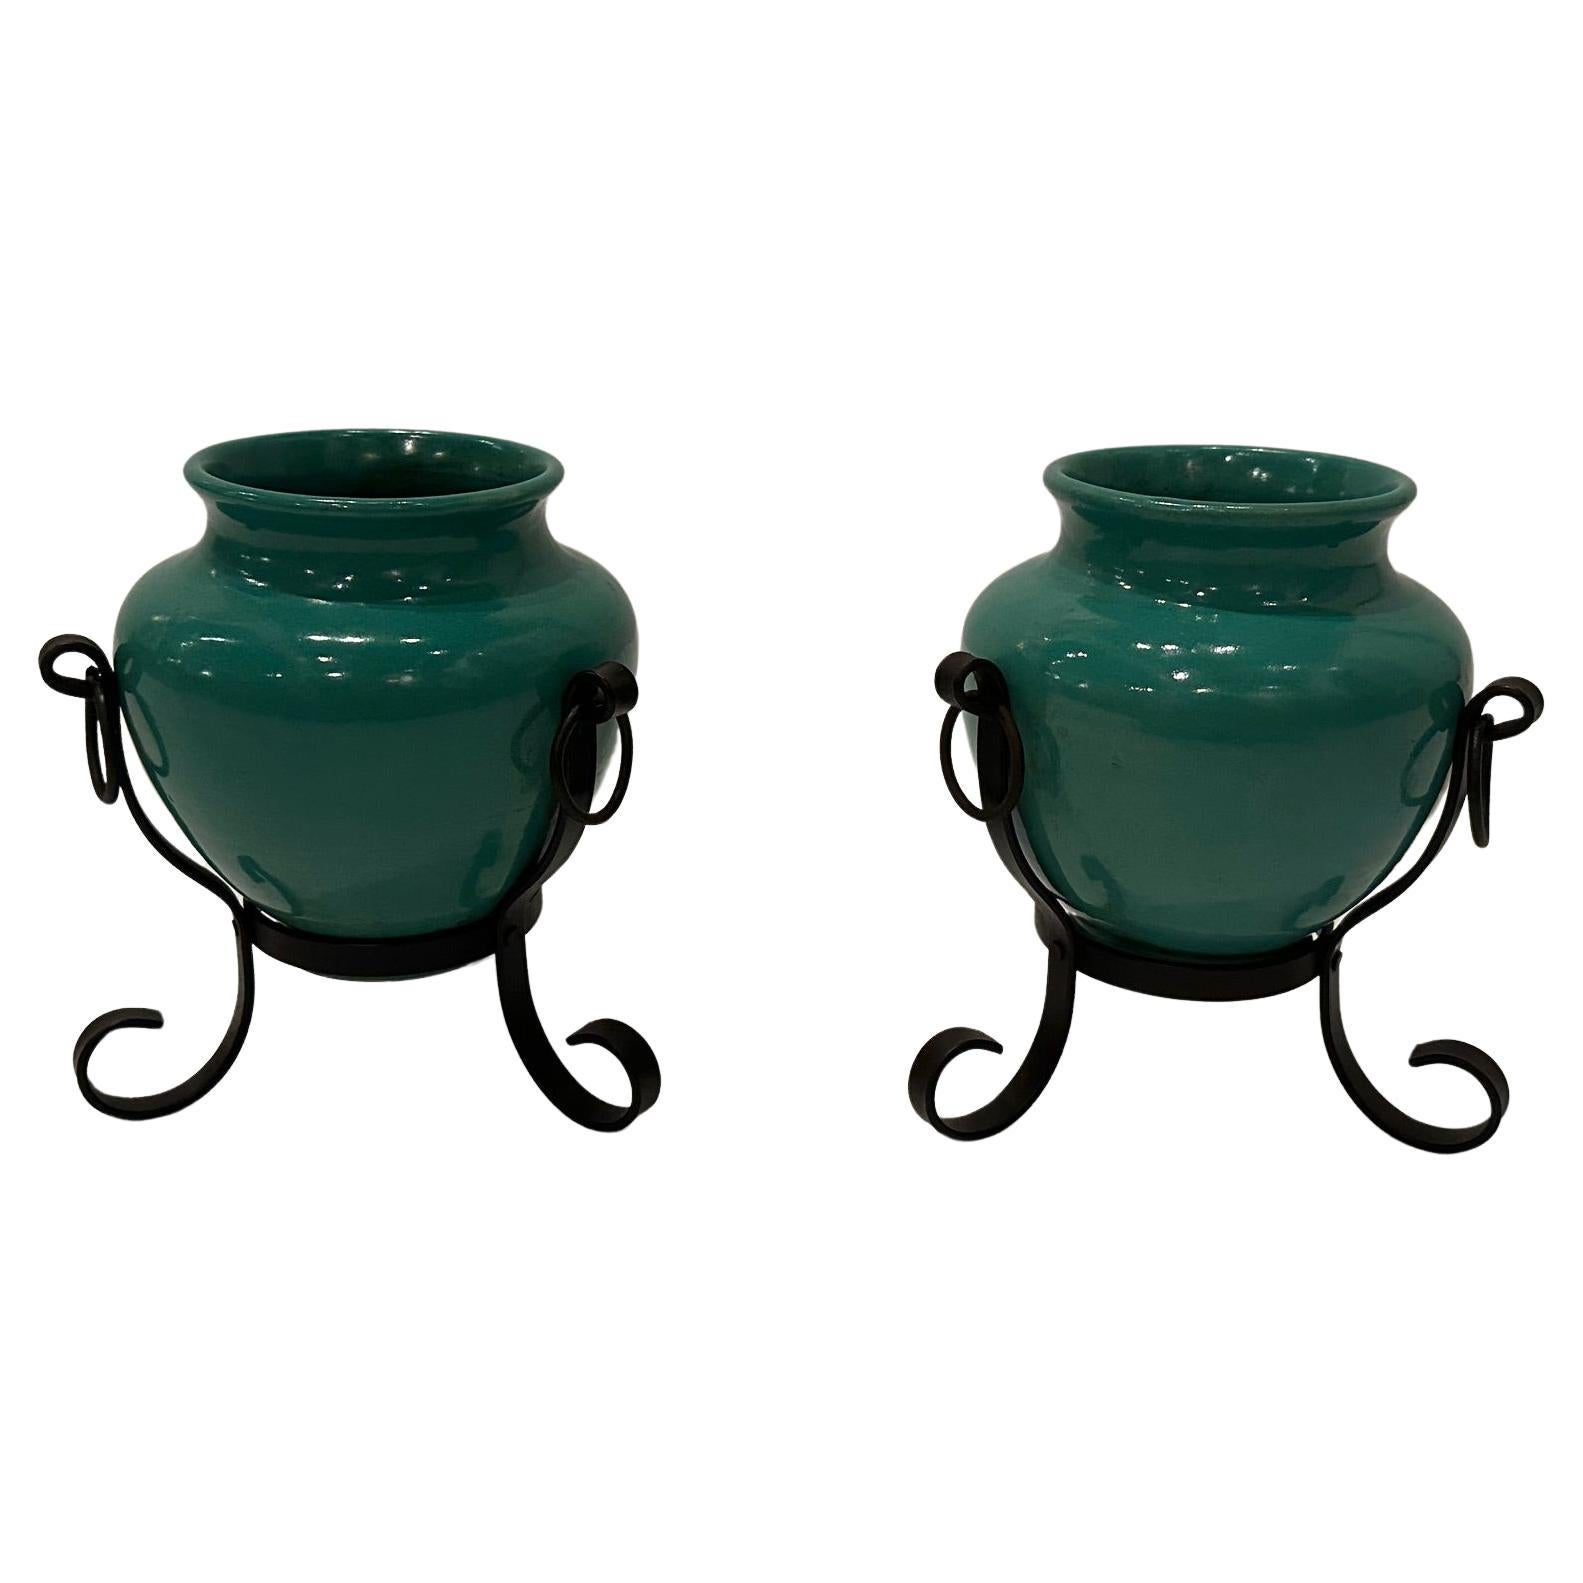 Stylish Pair of Italian Pottery Vases in Hand Wrought Iron Frames